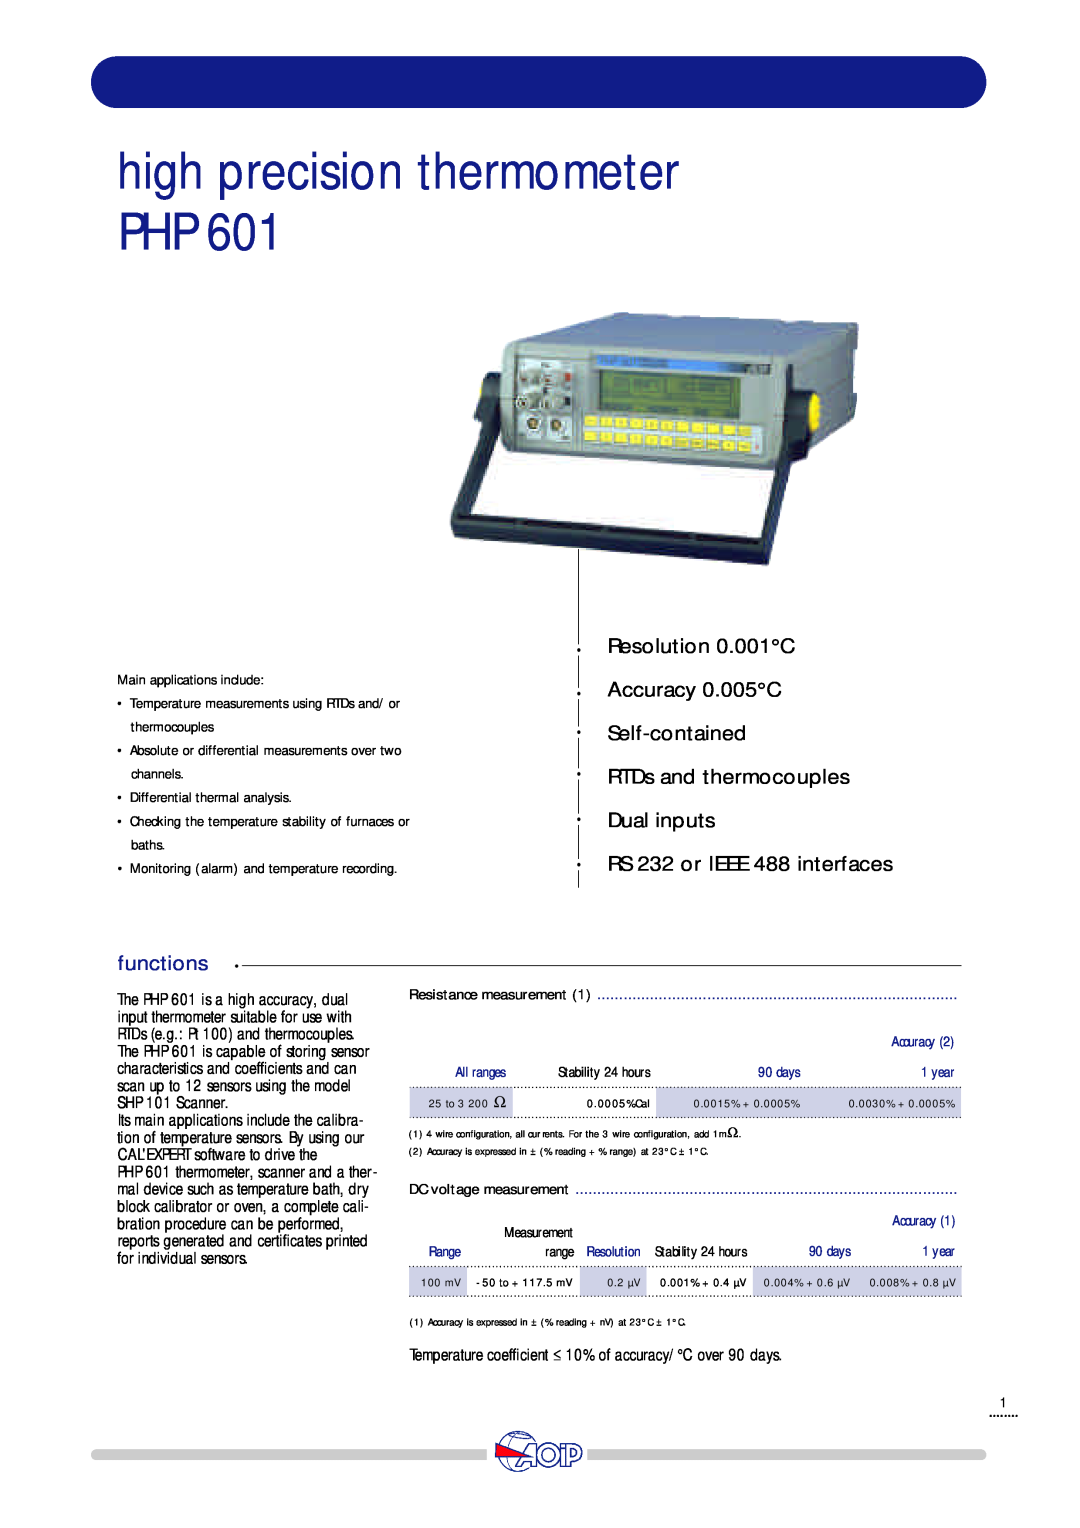 Thermo-Serv PHP601 manual functions, high precision thermometer PHP, Main applications include 